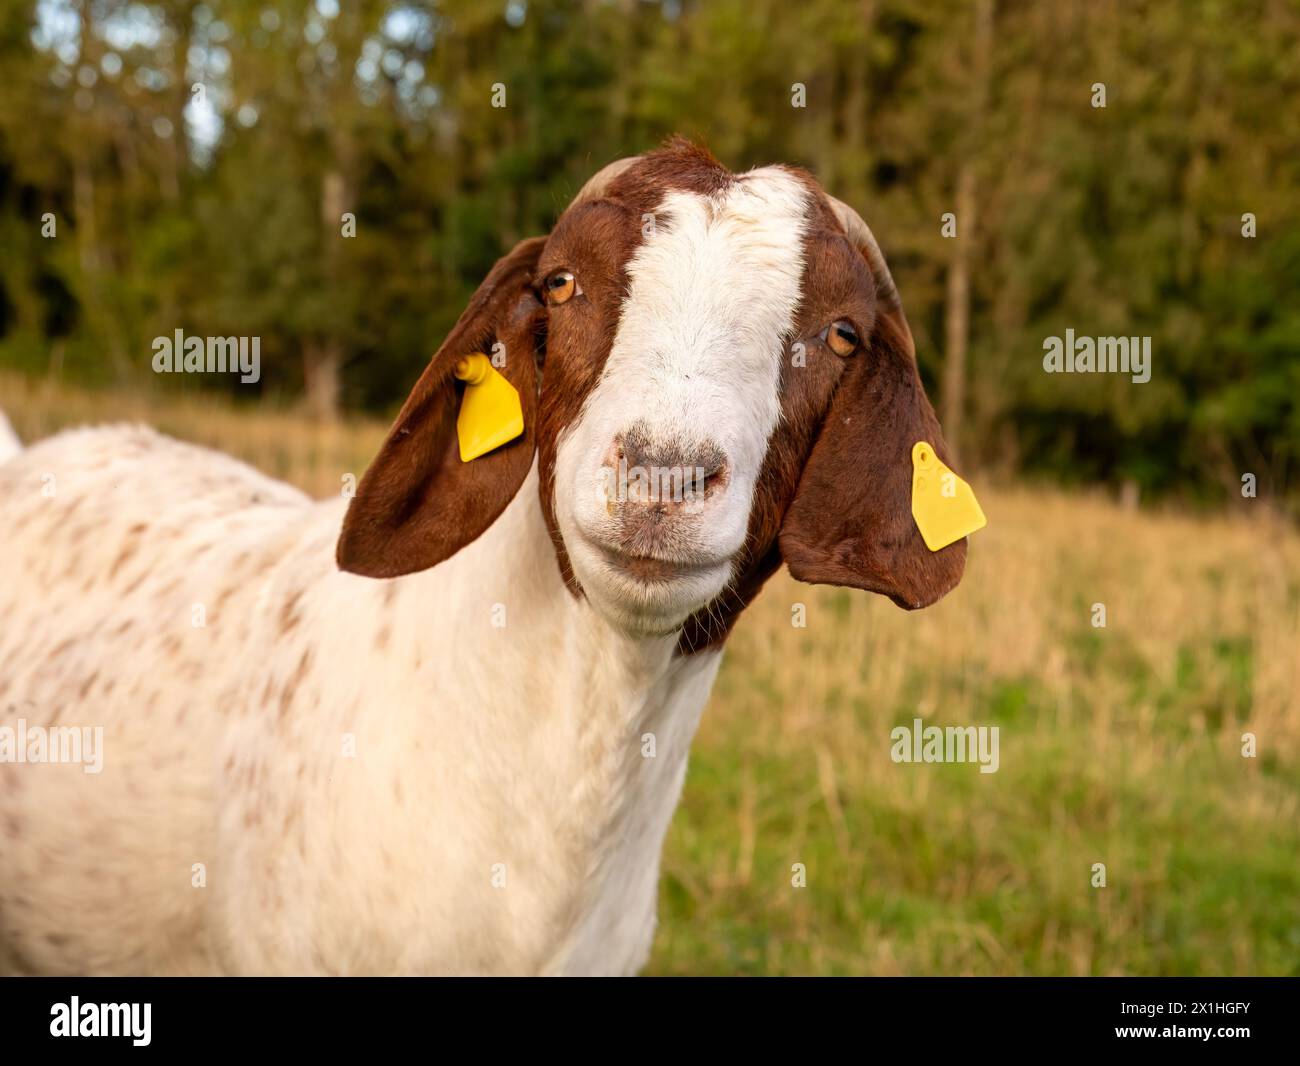 Portrait of head of brown white boer goat with ear tags looking at camera on Tunø island, Midtjylland, Denmark Stock Photo